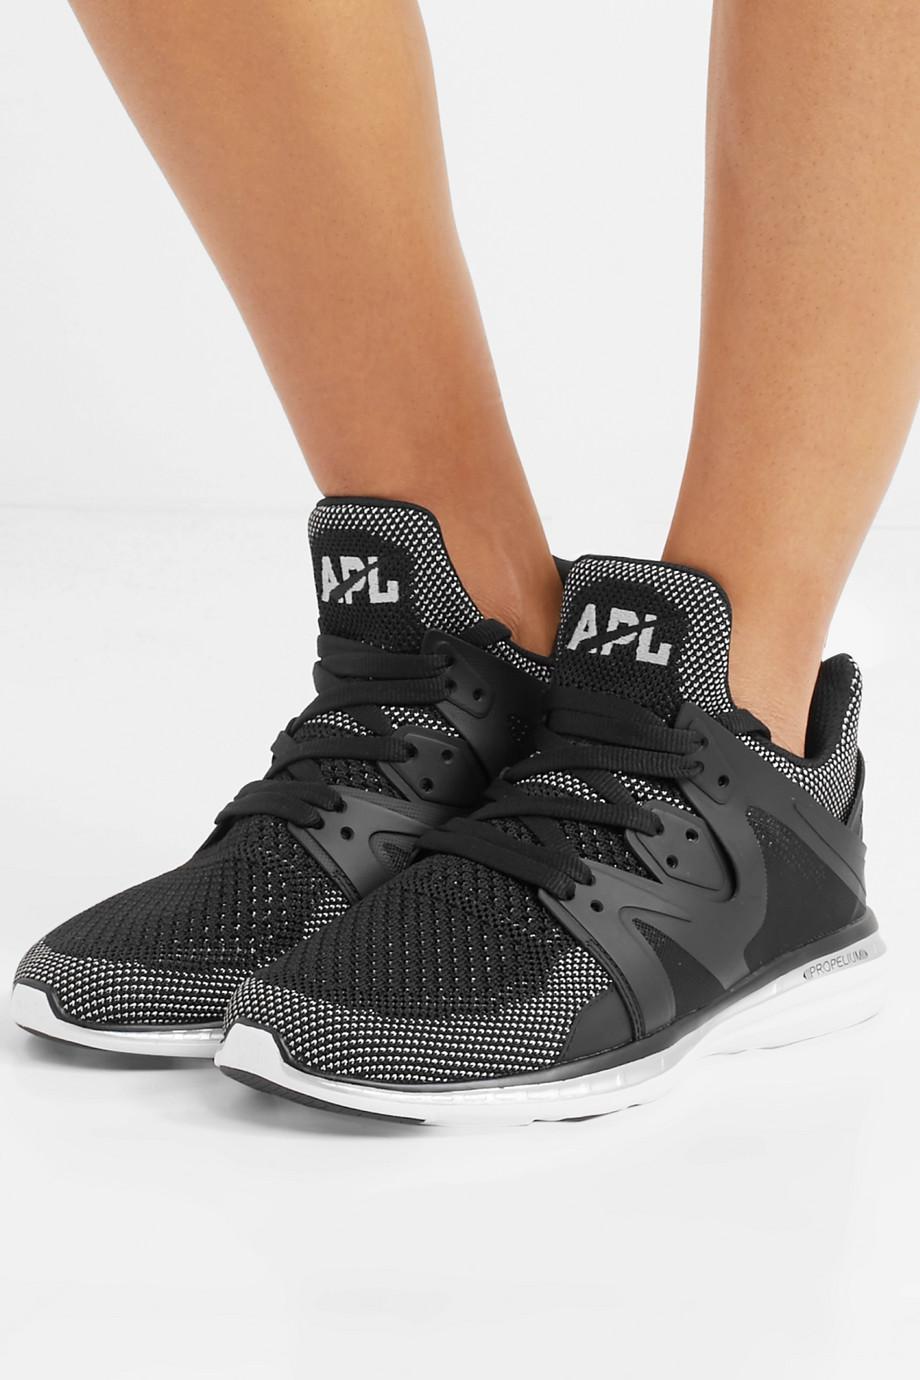 Athletic Propulsion Labs APL Ascend 1 +80 Most Inspiring Workout Shoes Ideas for Women - 3